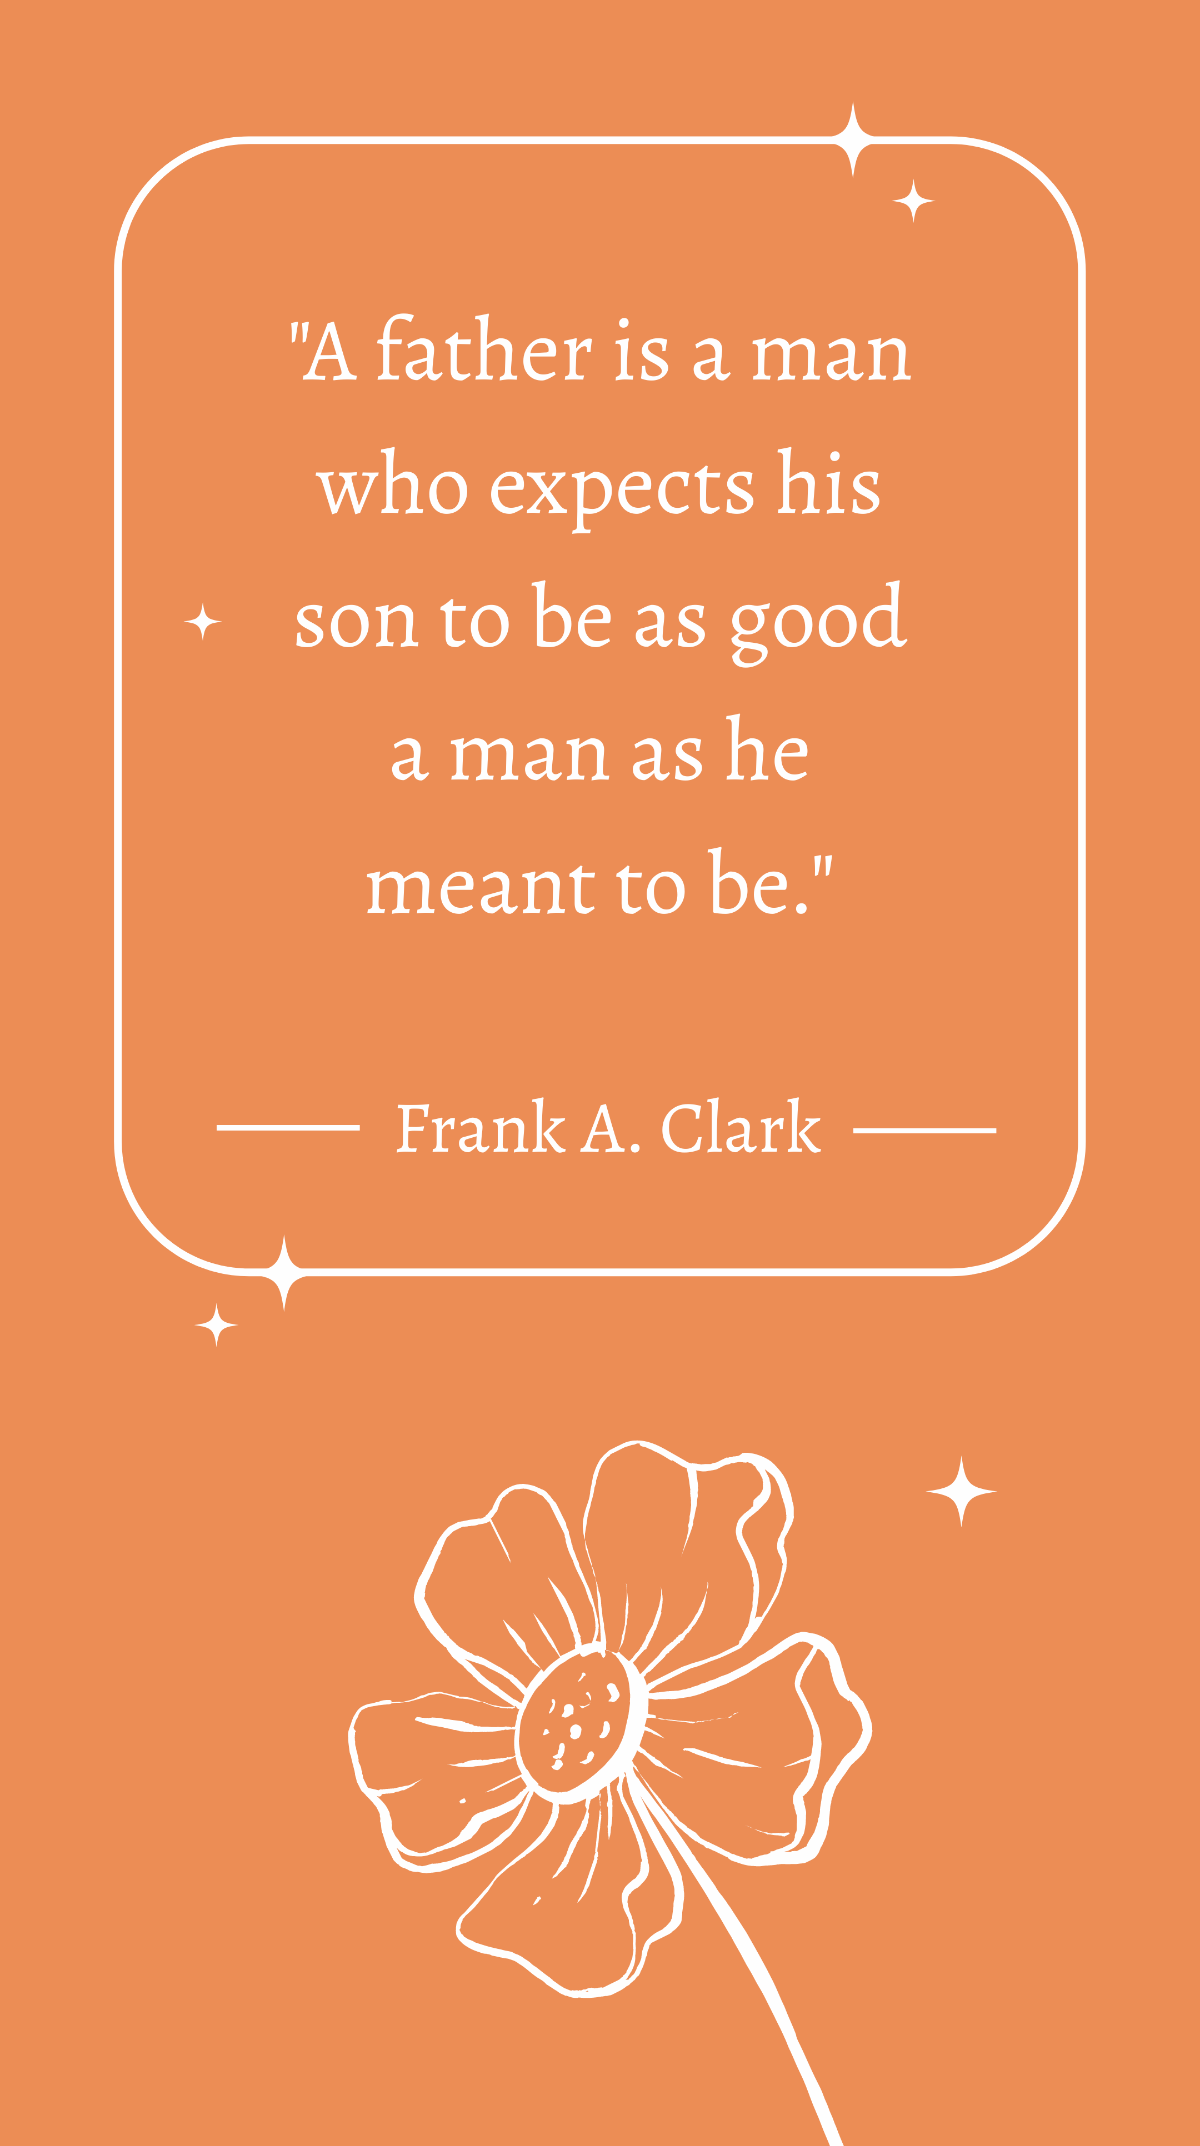 Frank A. Clark - A father is a man who expects his son to be as good a man as he meant to be. Template